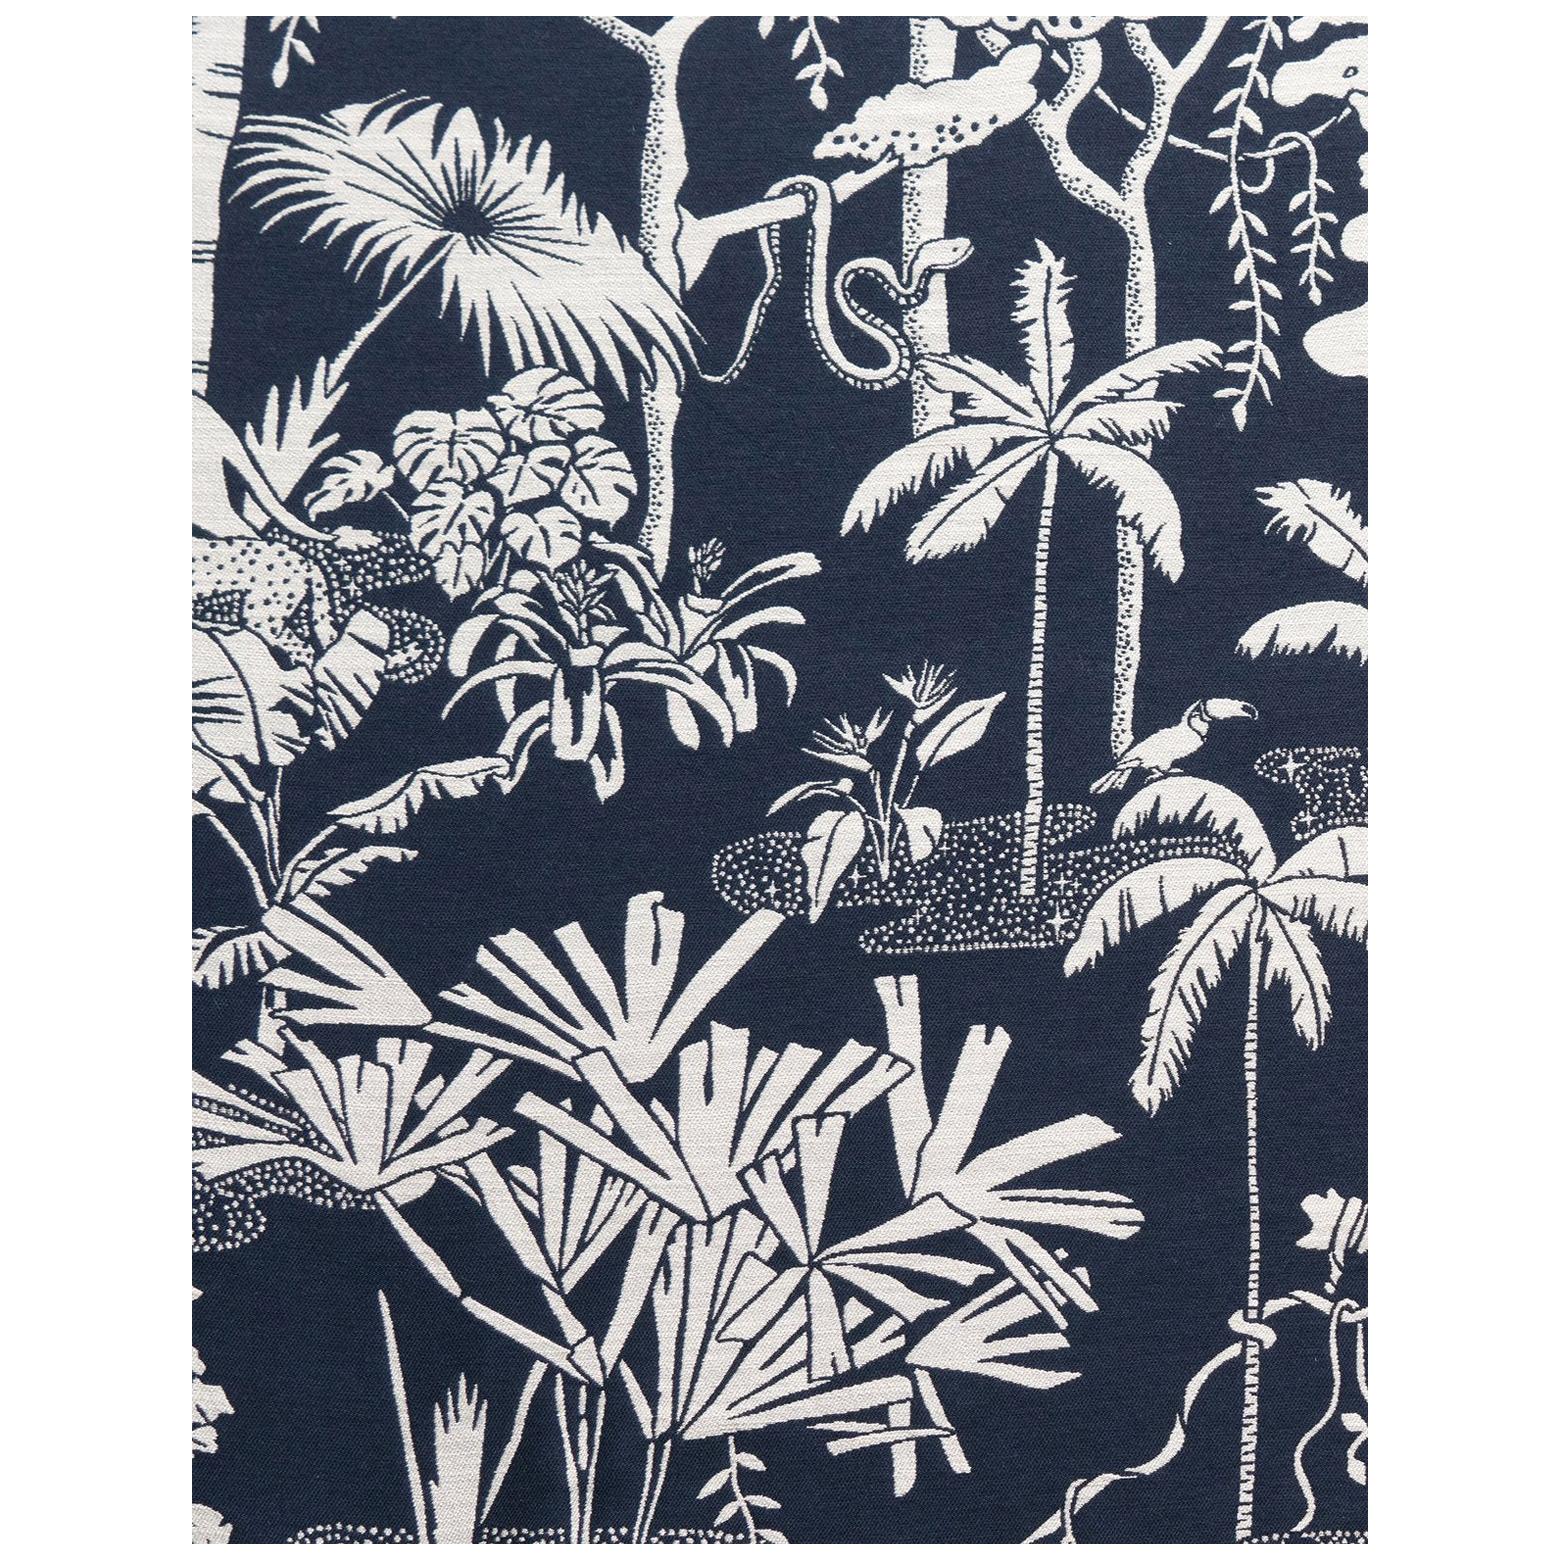 Jungle Dream Woven Commercial Grade Fabric in Oxford, White and Navy